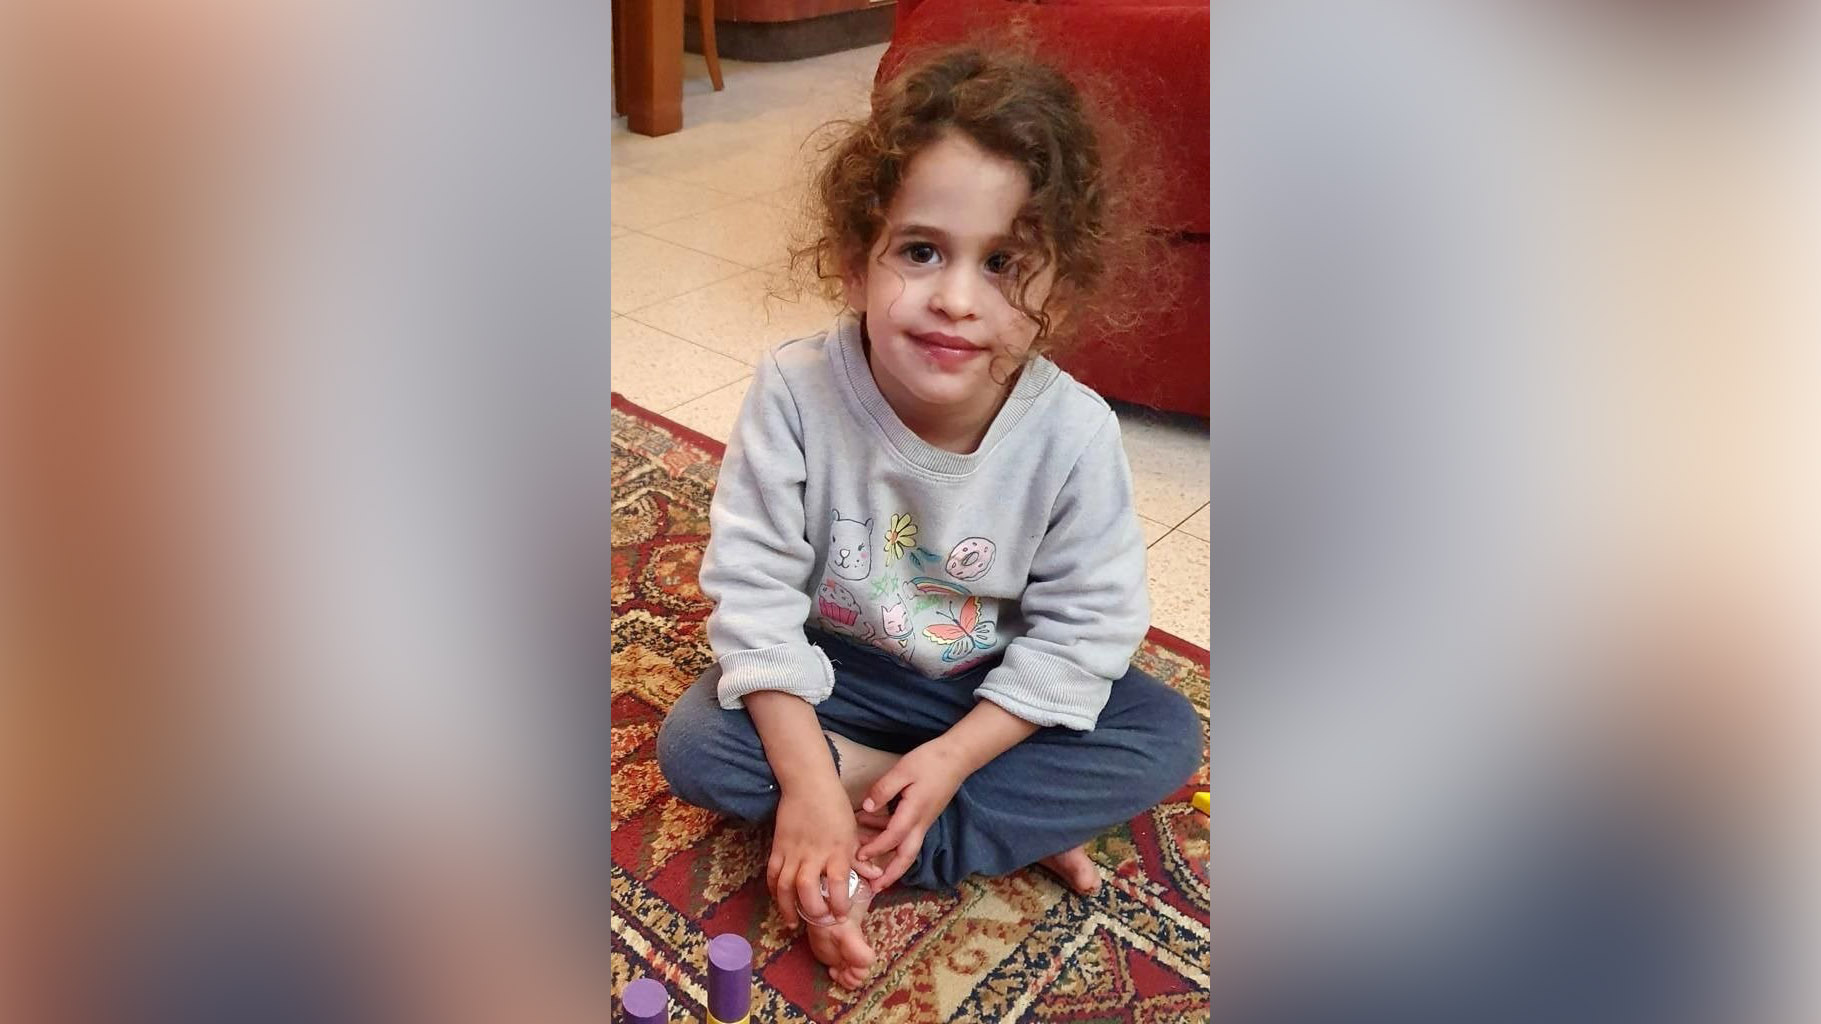 Abigail Edan, a 3-year-old Israeli American who was orphaned when her parents were killed by Hamas, is one of the hostages held by the militant group, according to Elizabeth Hirsh Naftali, the child’s great-aunt. Her 4th birthday is on Friday, her great-aunt said. 